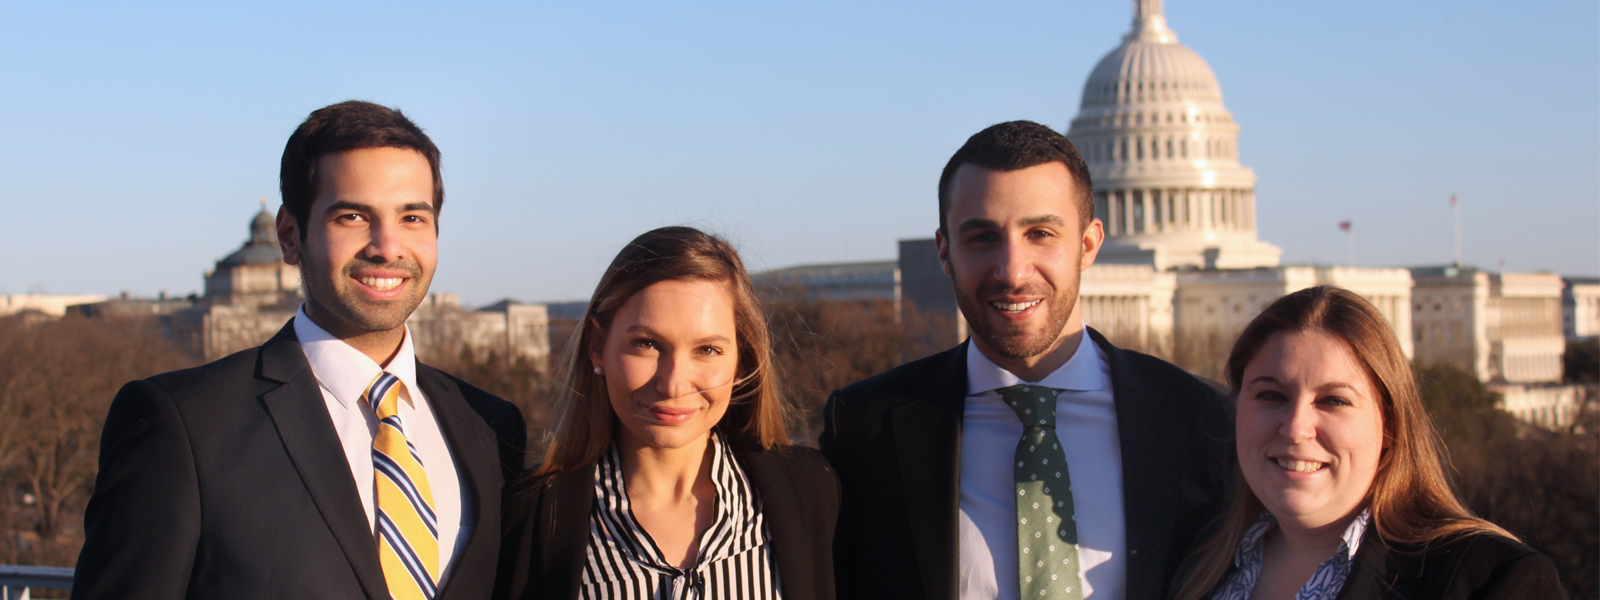 law students in Washington, DC